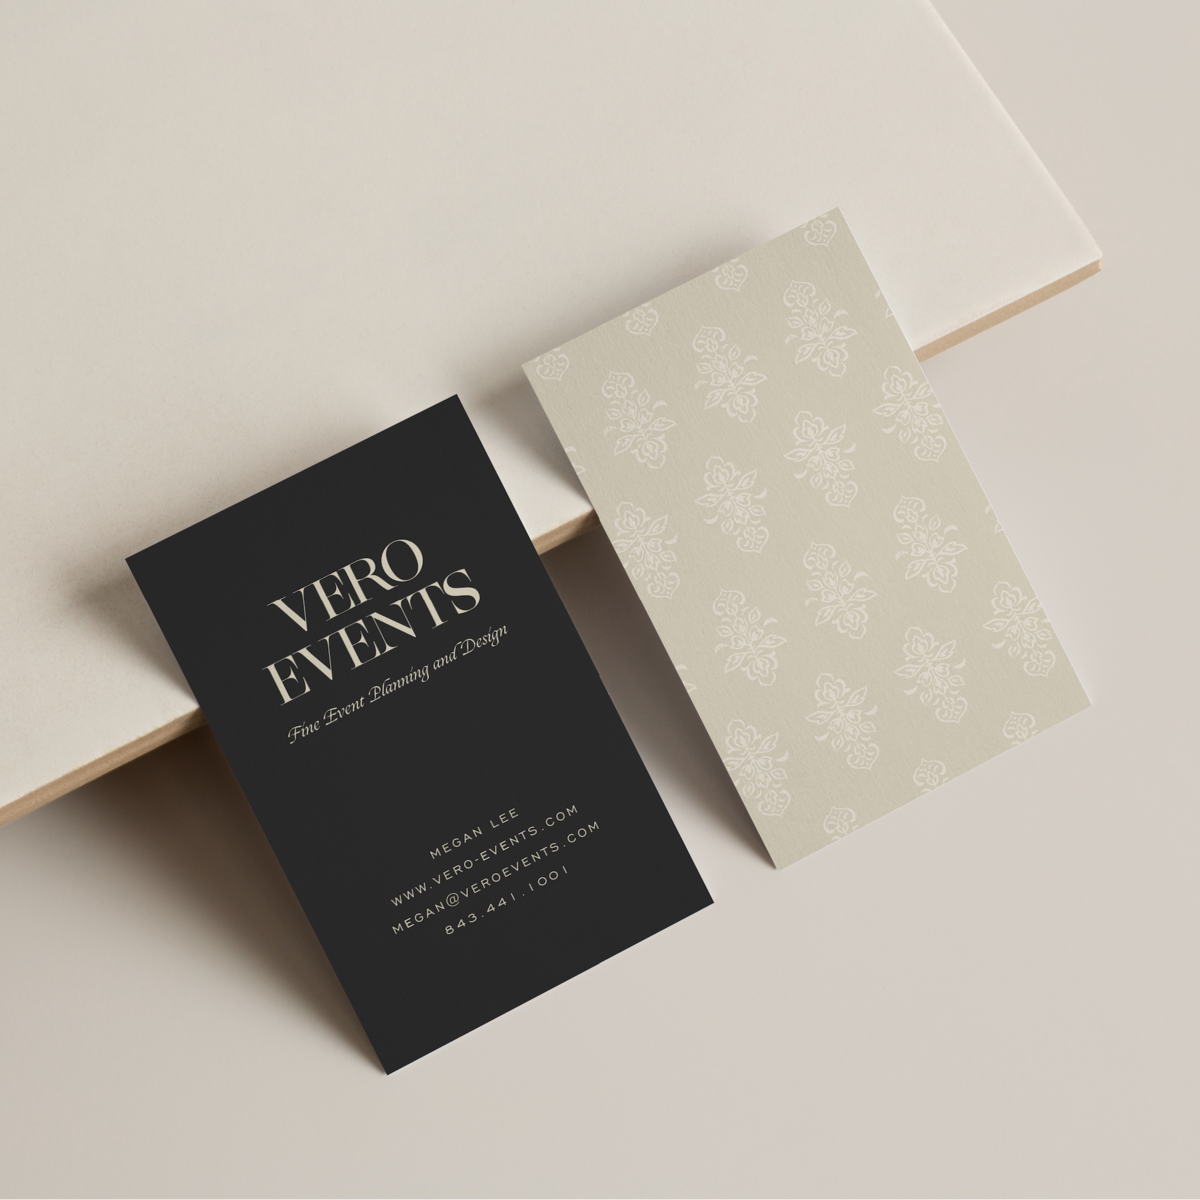 Two business cards, one black with white lettering and one beige with floral design, displayed against white countertop.